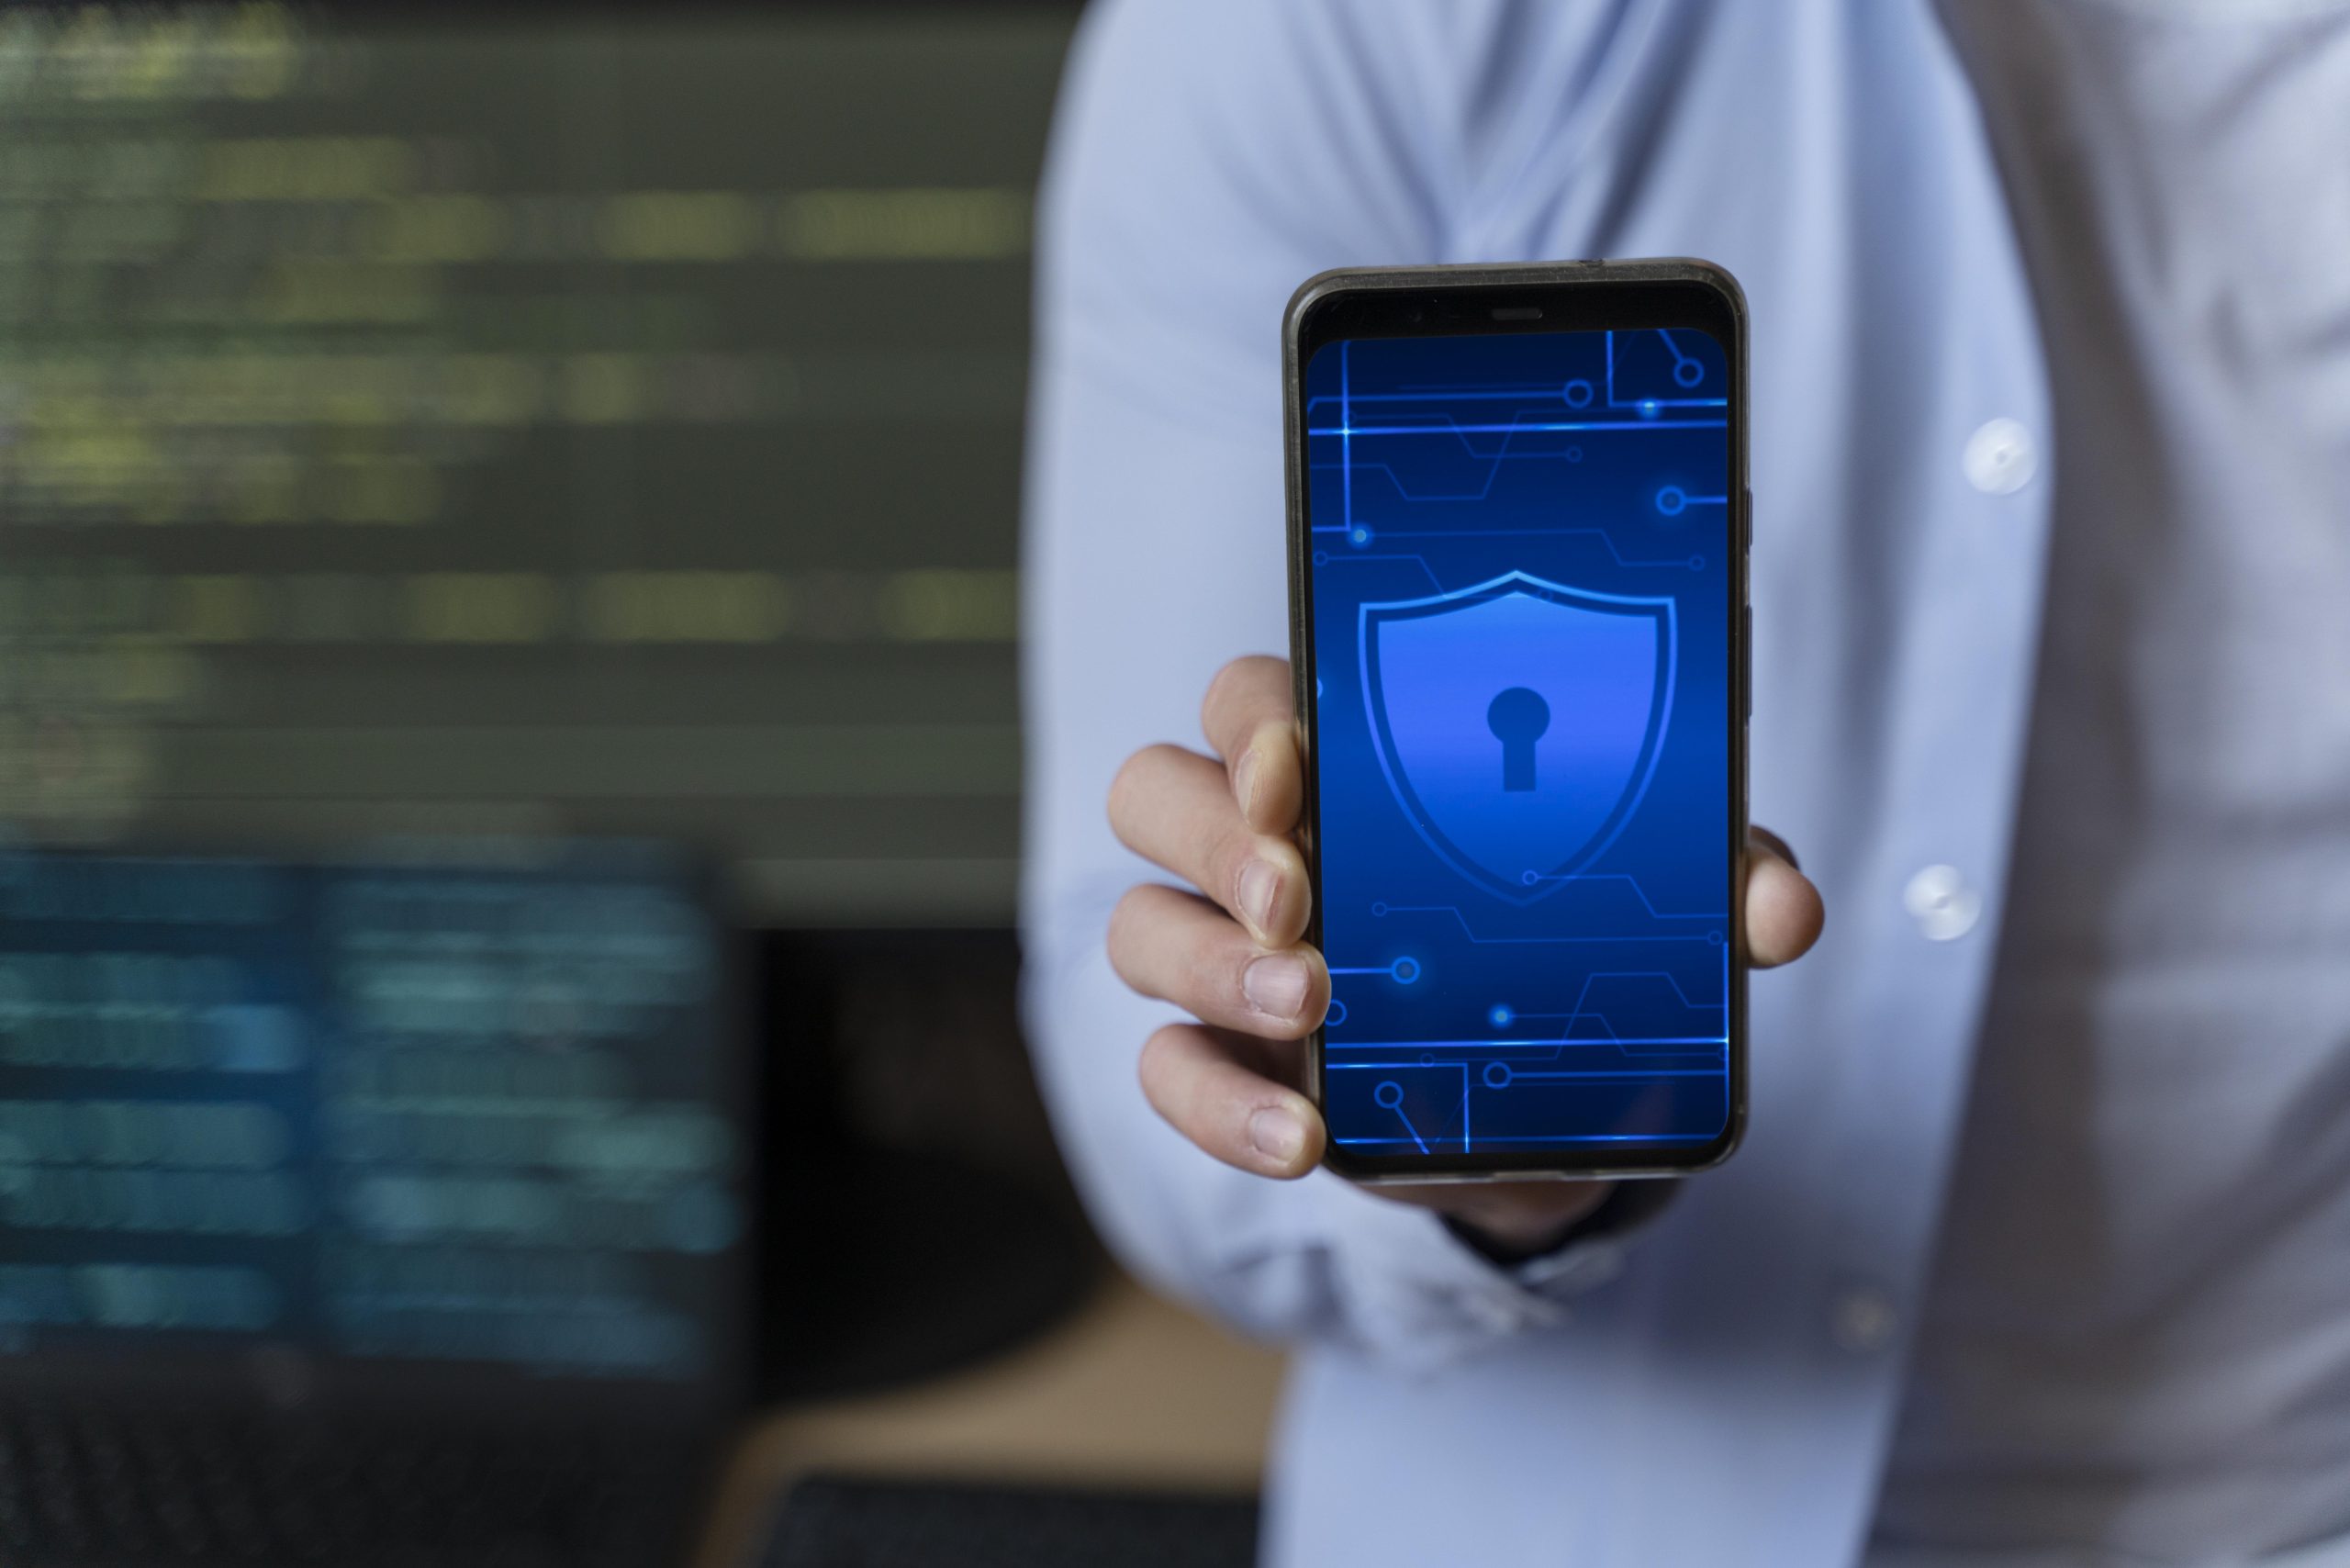 Frequently Asked Questions about Secure Phones